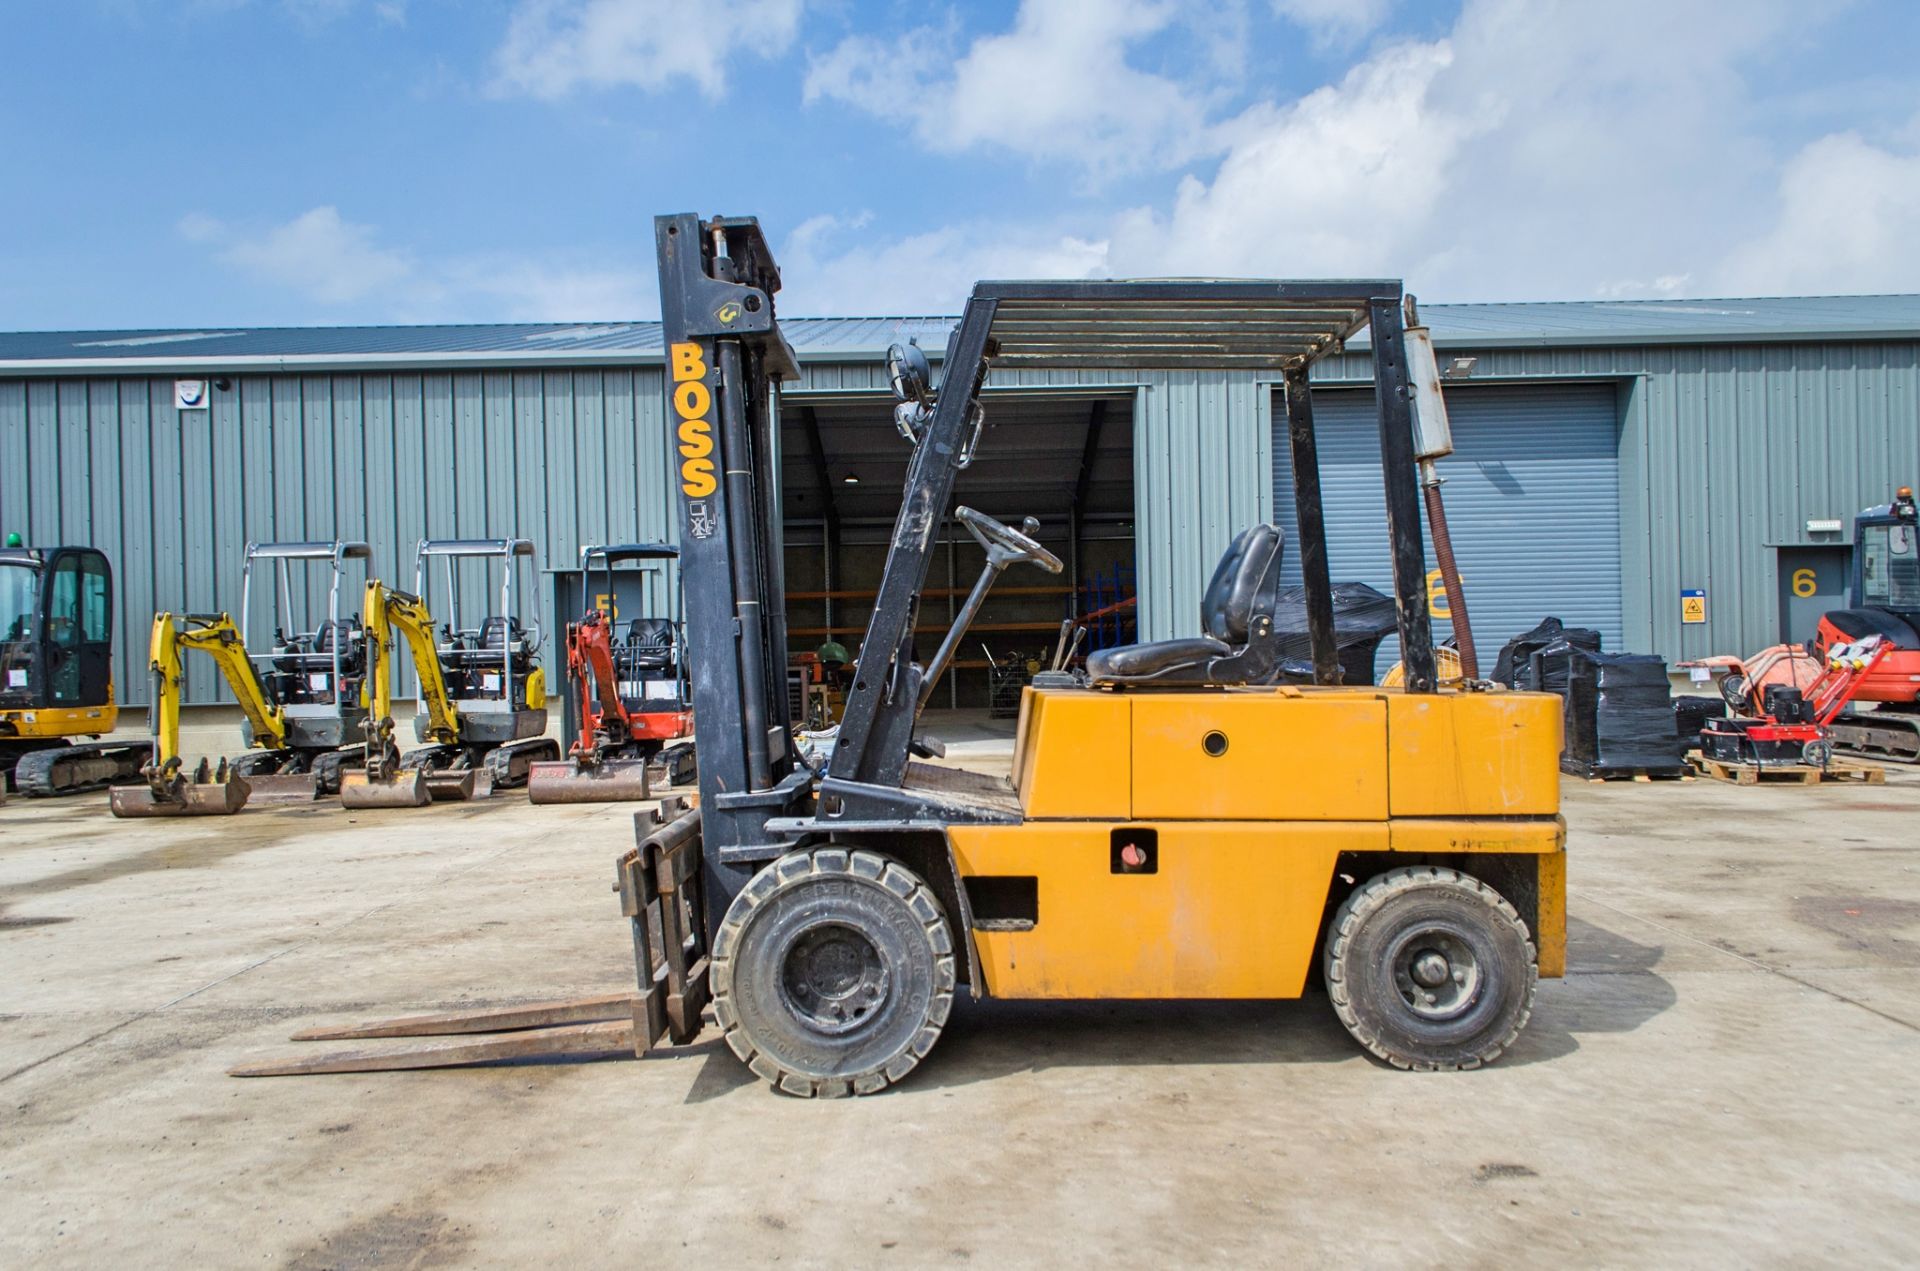 Boss RH30D 3 tonne diesel driven fork lift truck Year: Not stated on plate S/N: 01329 Recorded - Image 7 of 15